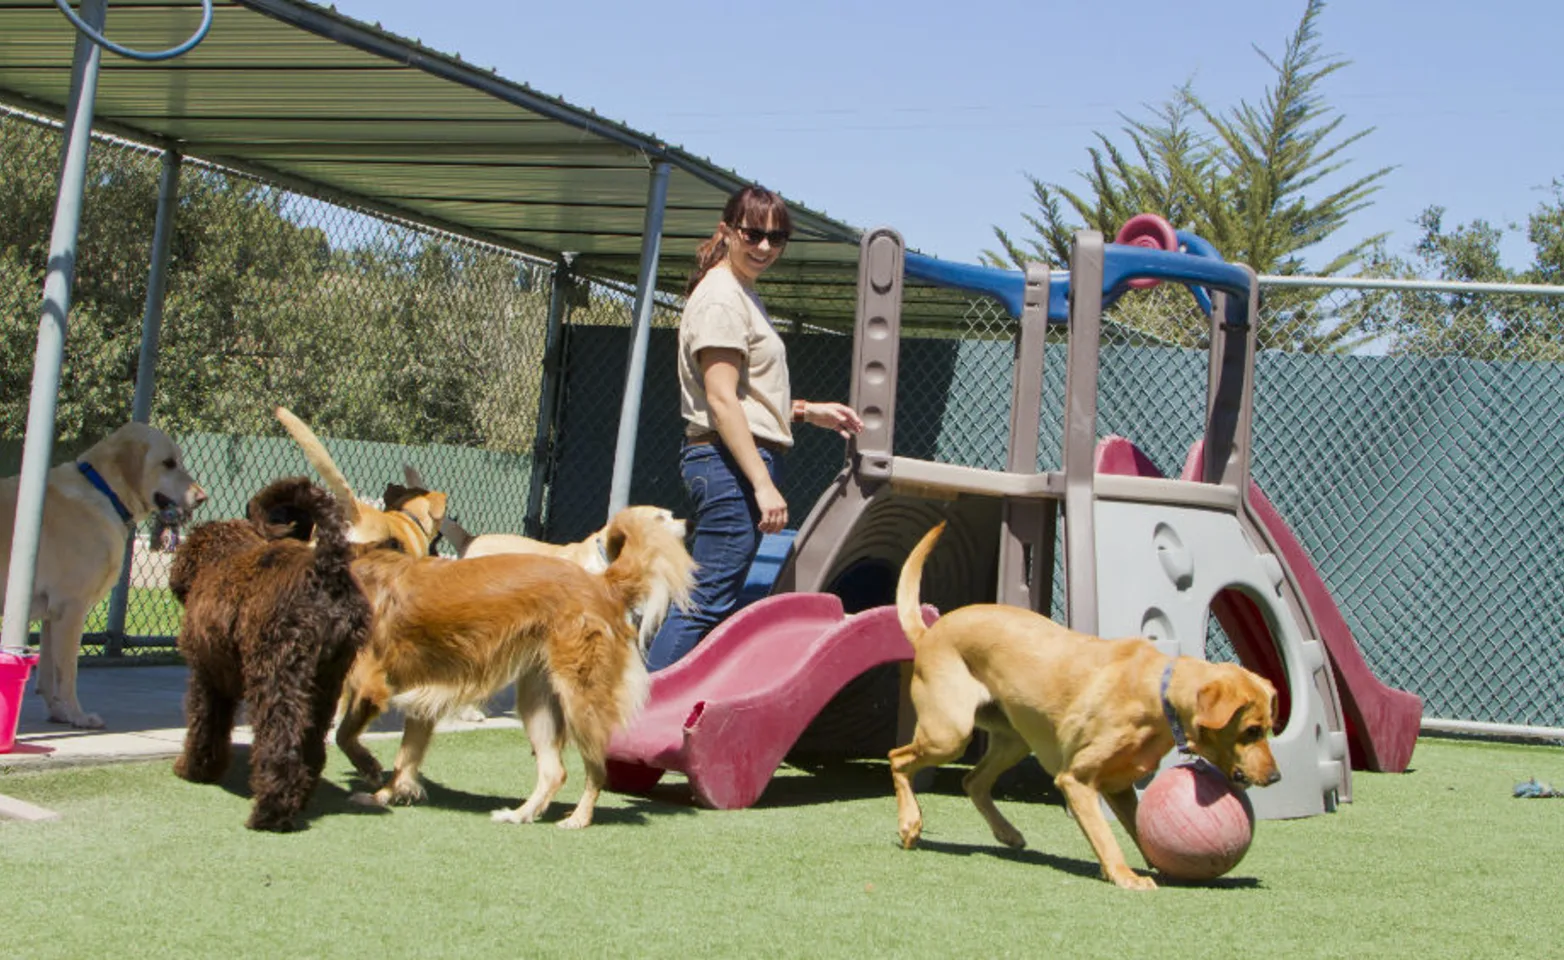 Dogs Playing Outside at Playground